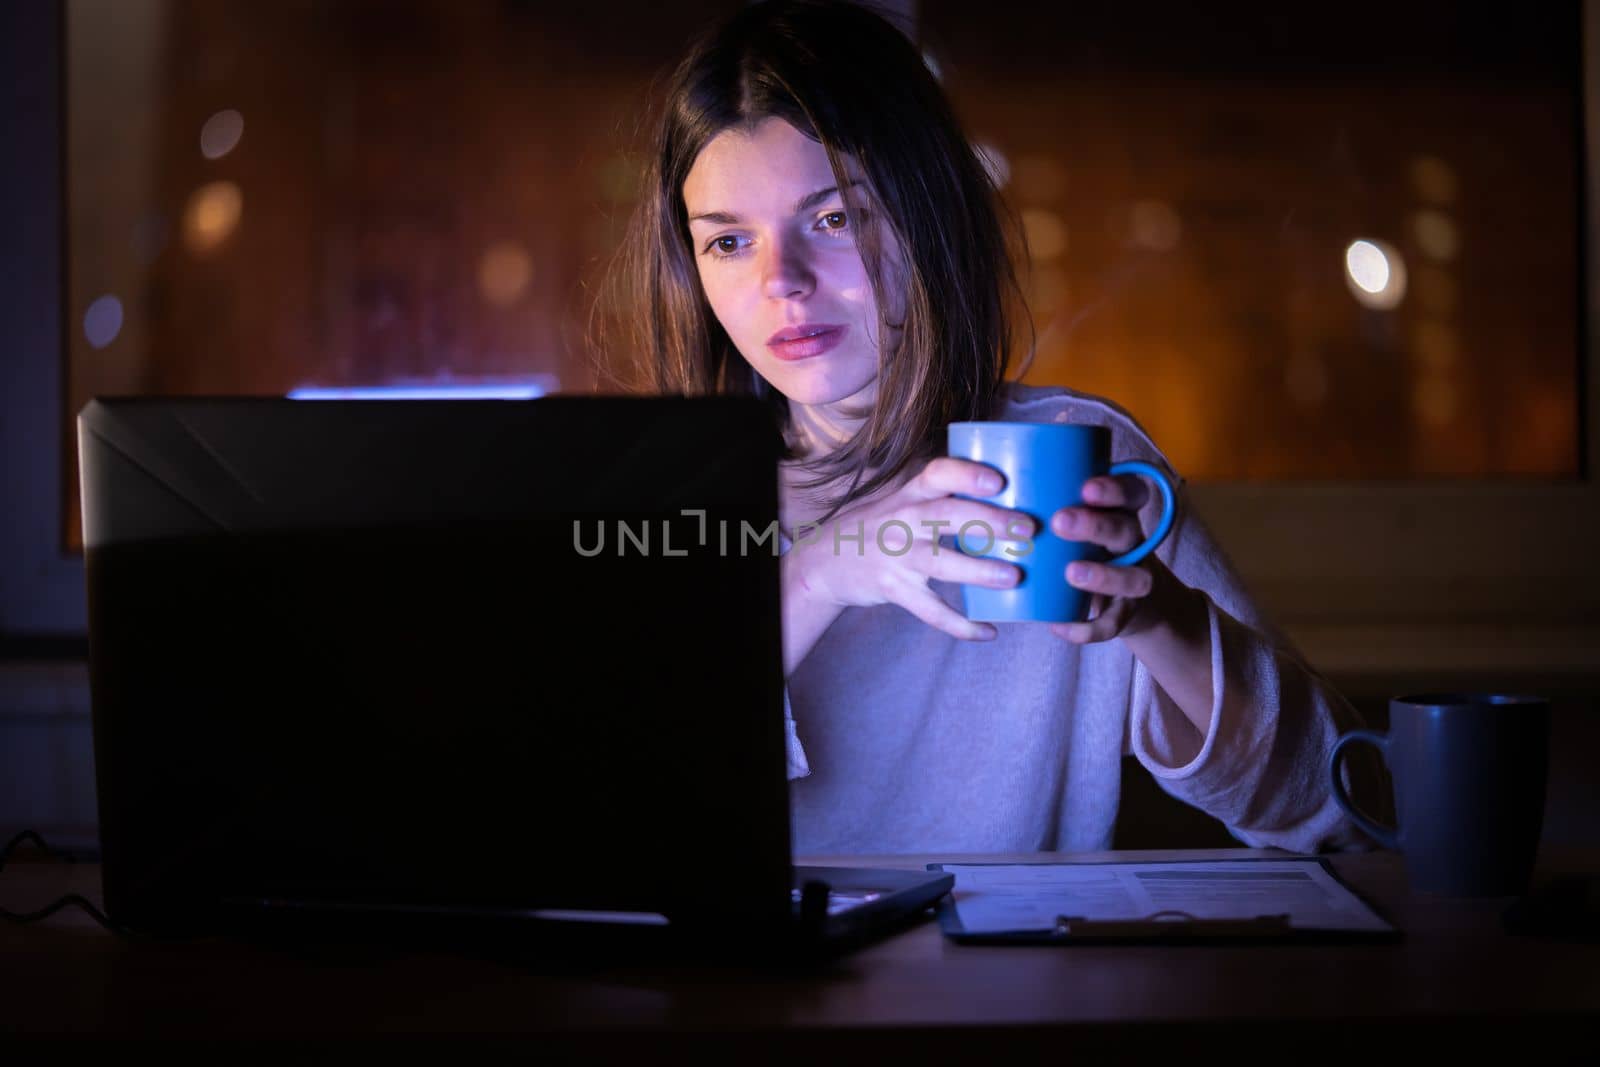 Woman works on a laptop online at night. by africapink